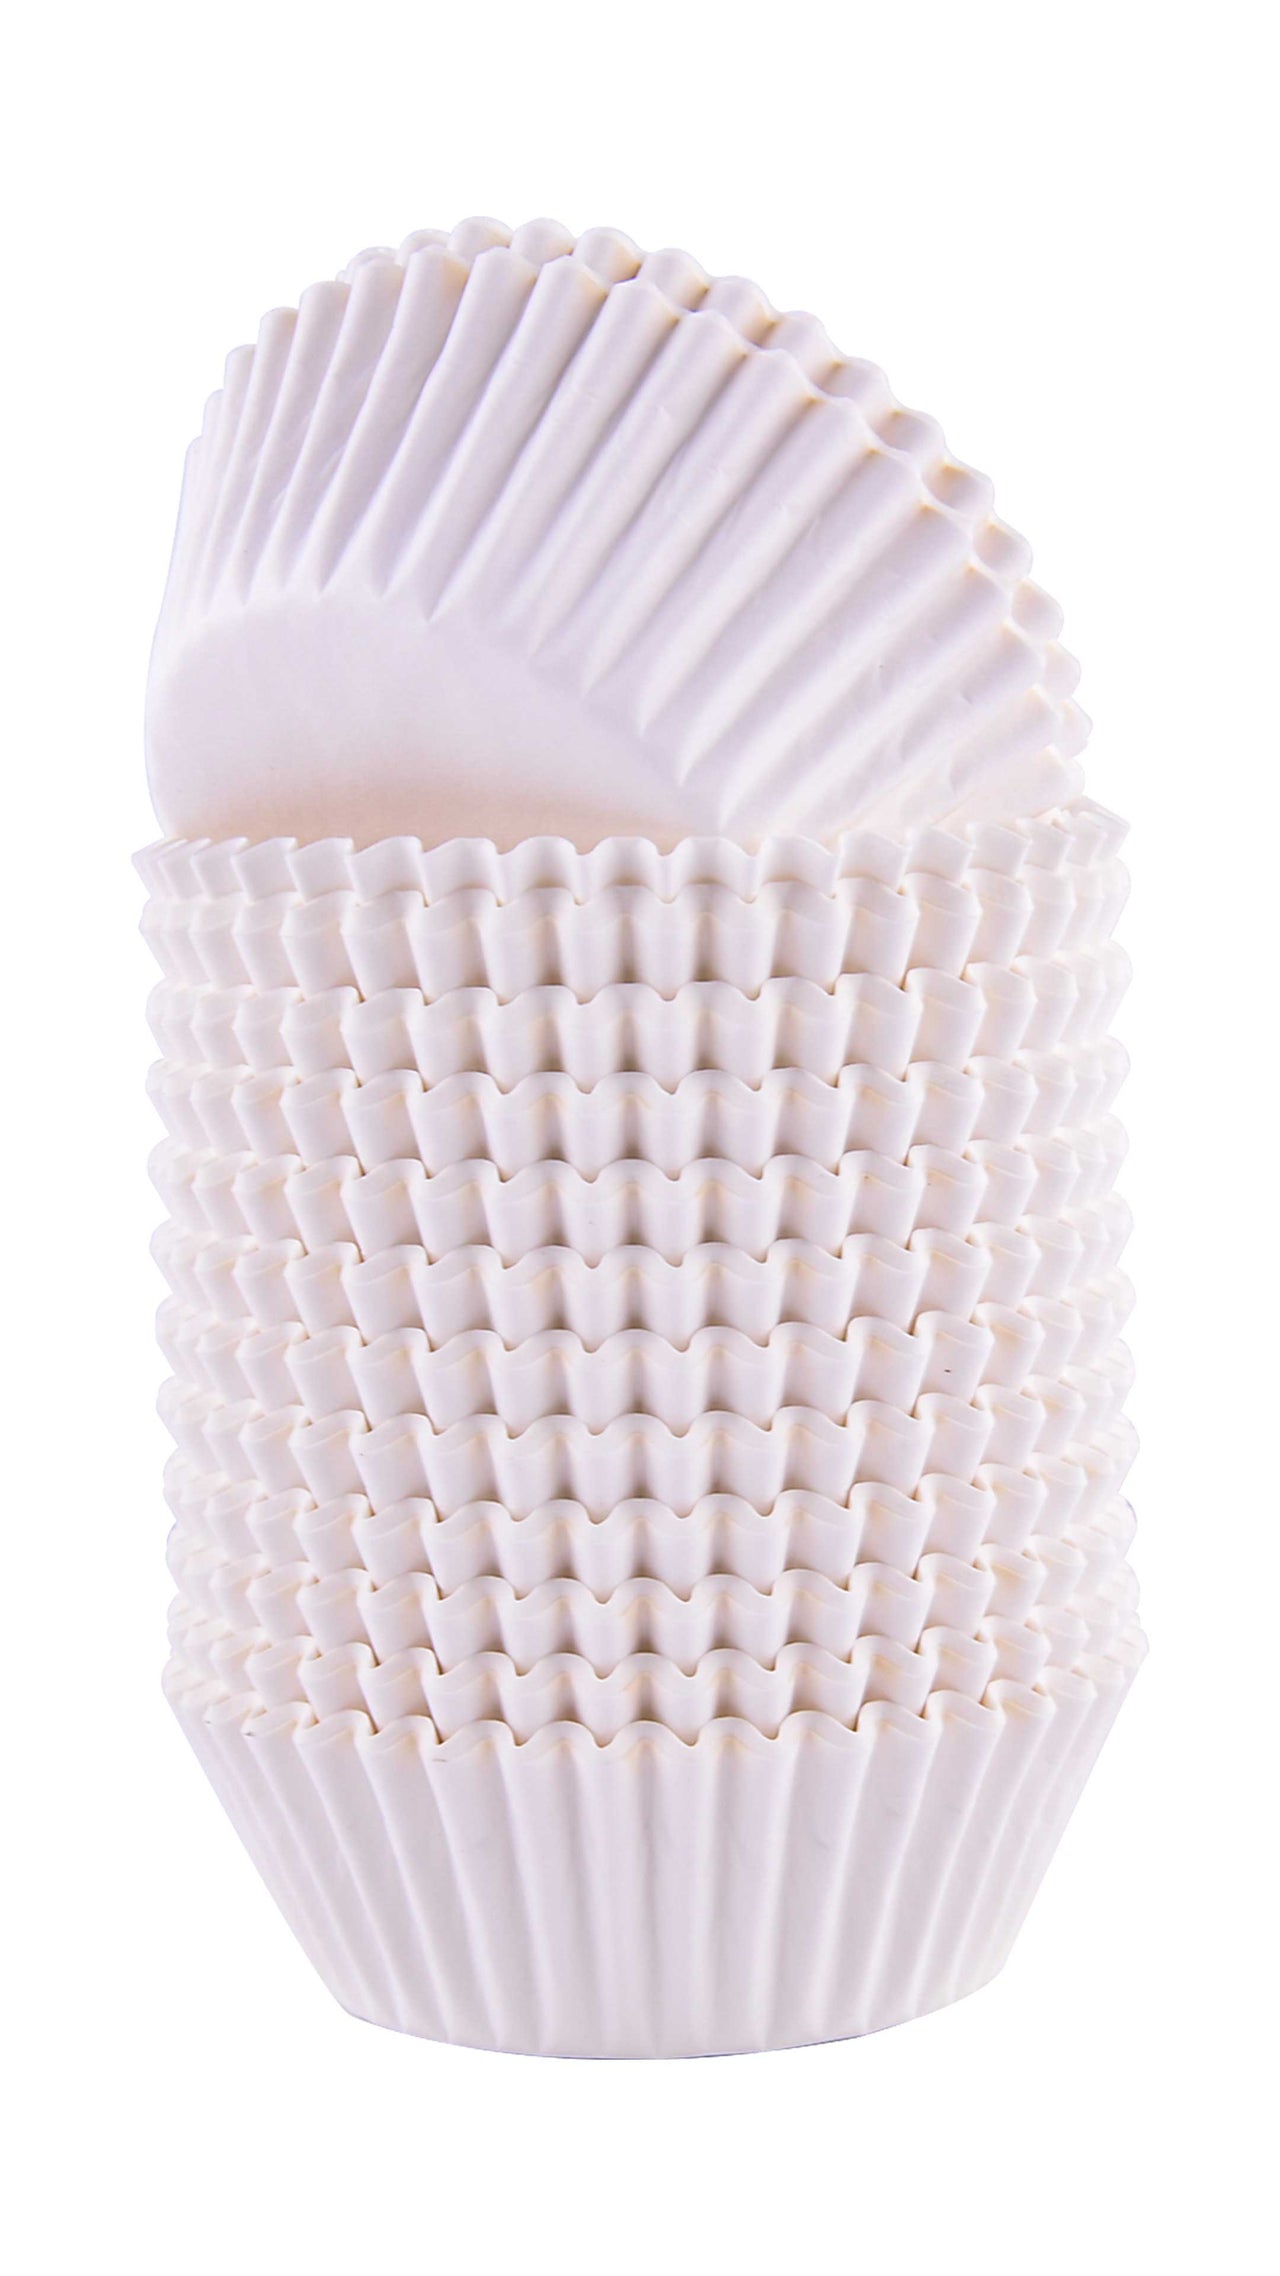 PME - Cupcake Cases - White - 300 Pack Cupcake Cases PME